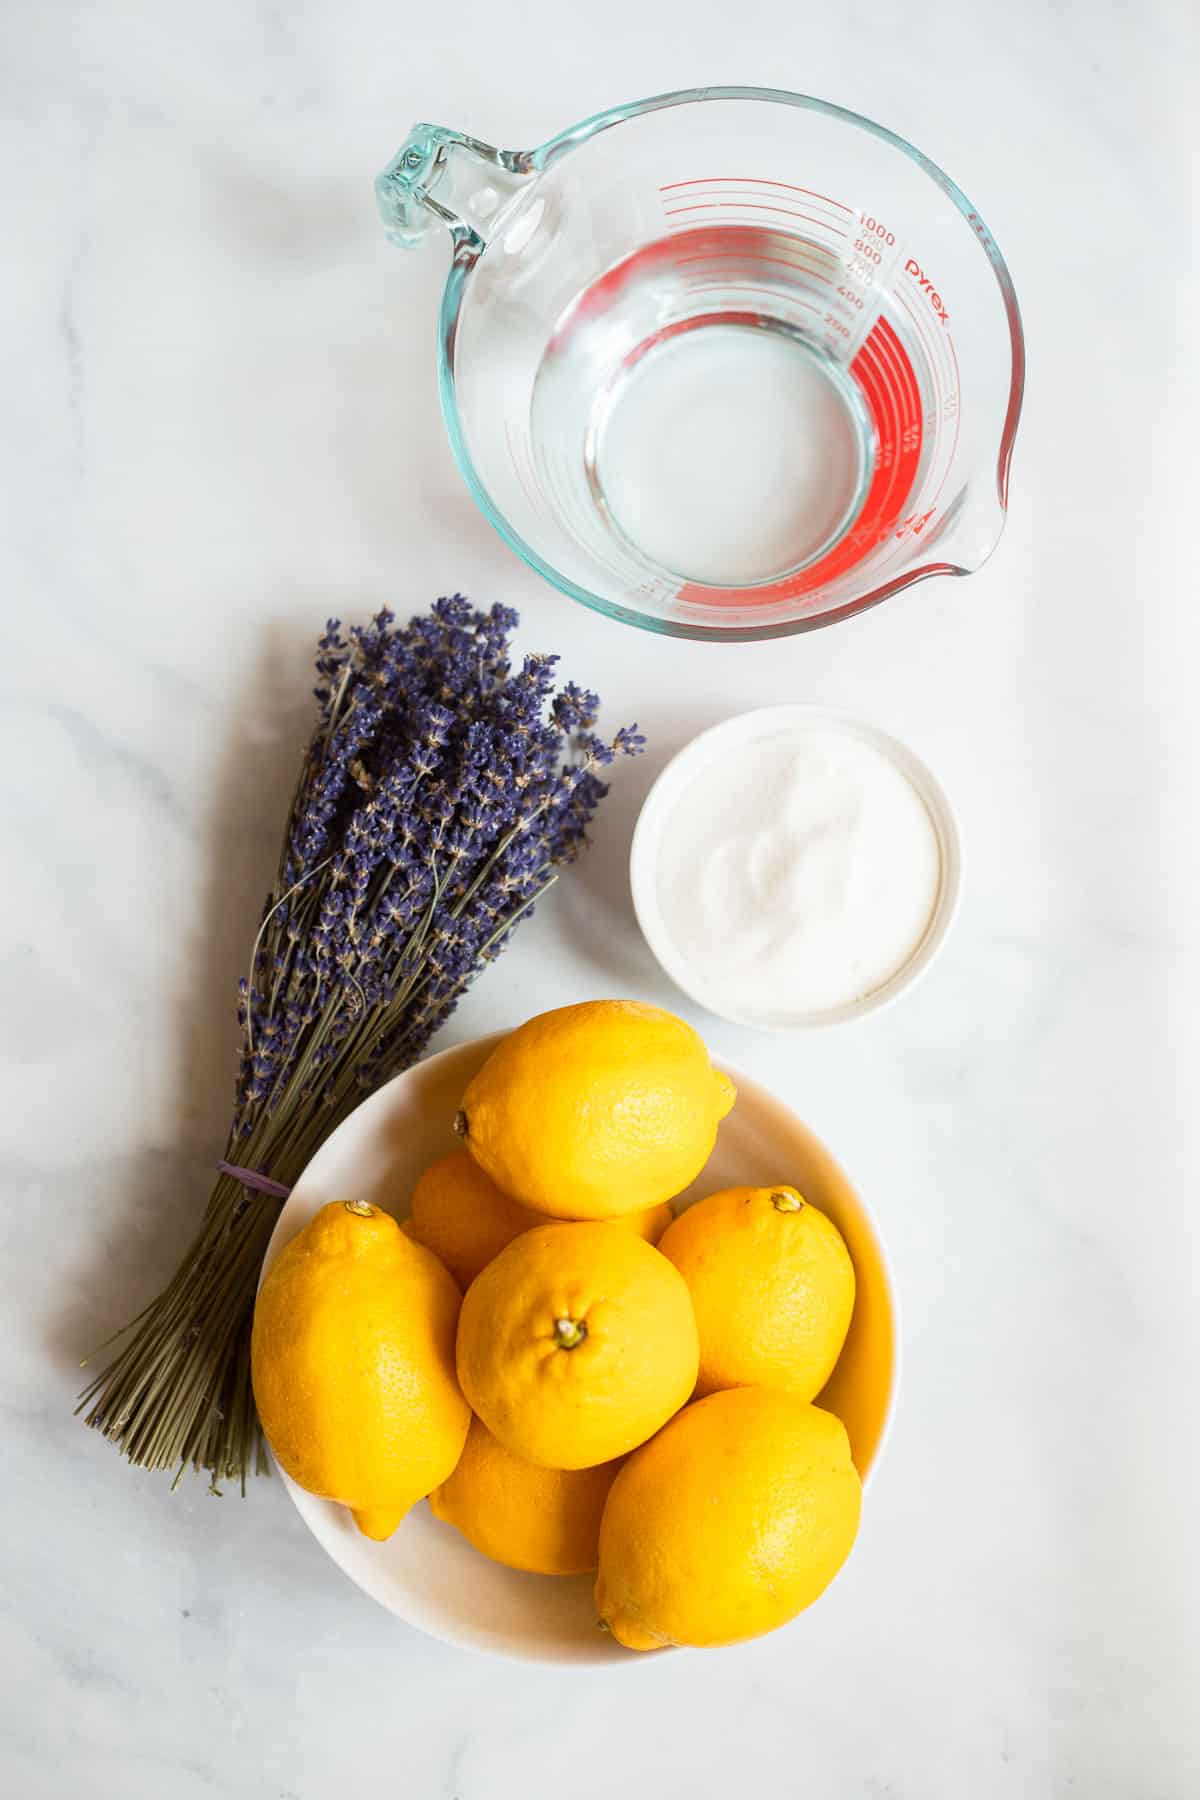 lavender lemonade ingredients laid out on a white background.